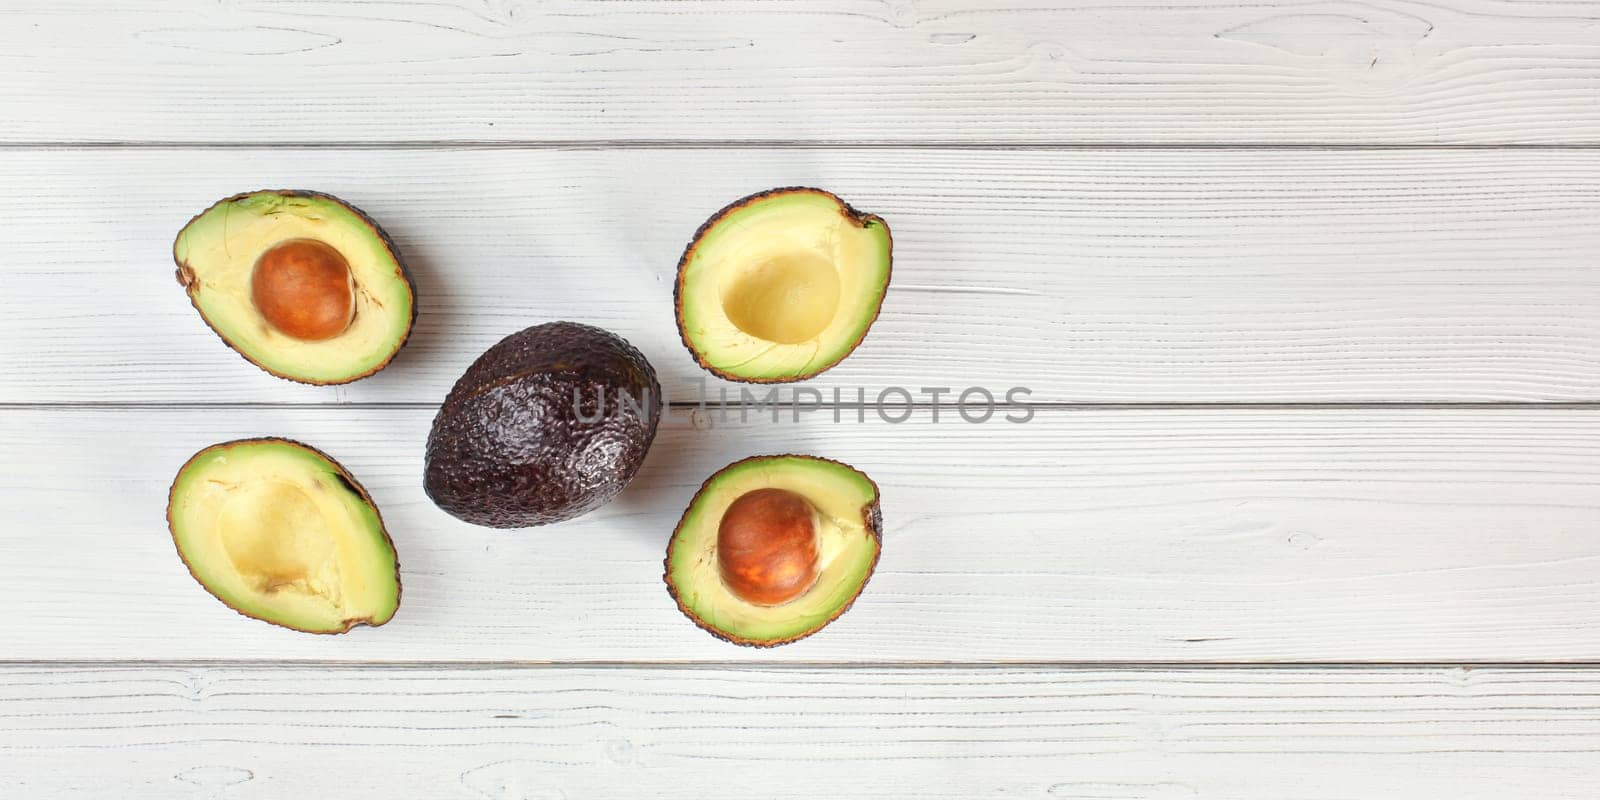 Ripe brown avocado - Hass bilse variety - halved and arranged on white boards desk, view from above, space for text right side by Ivanko